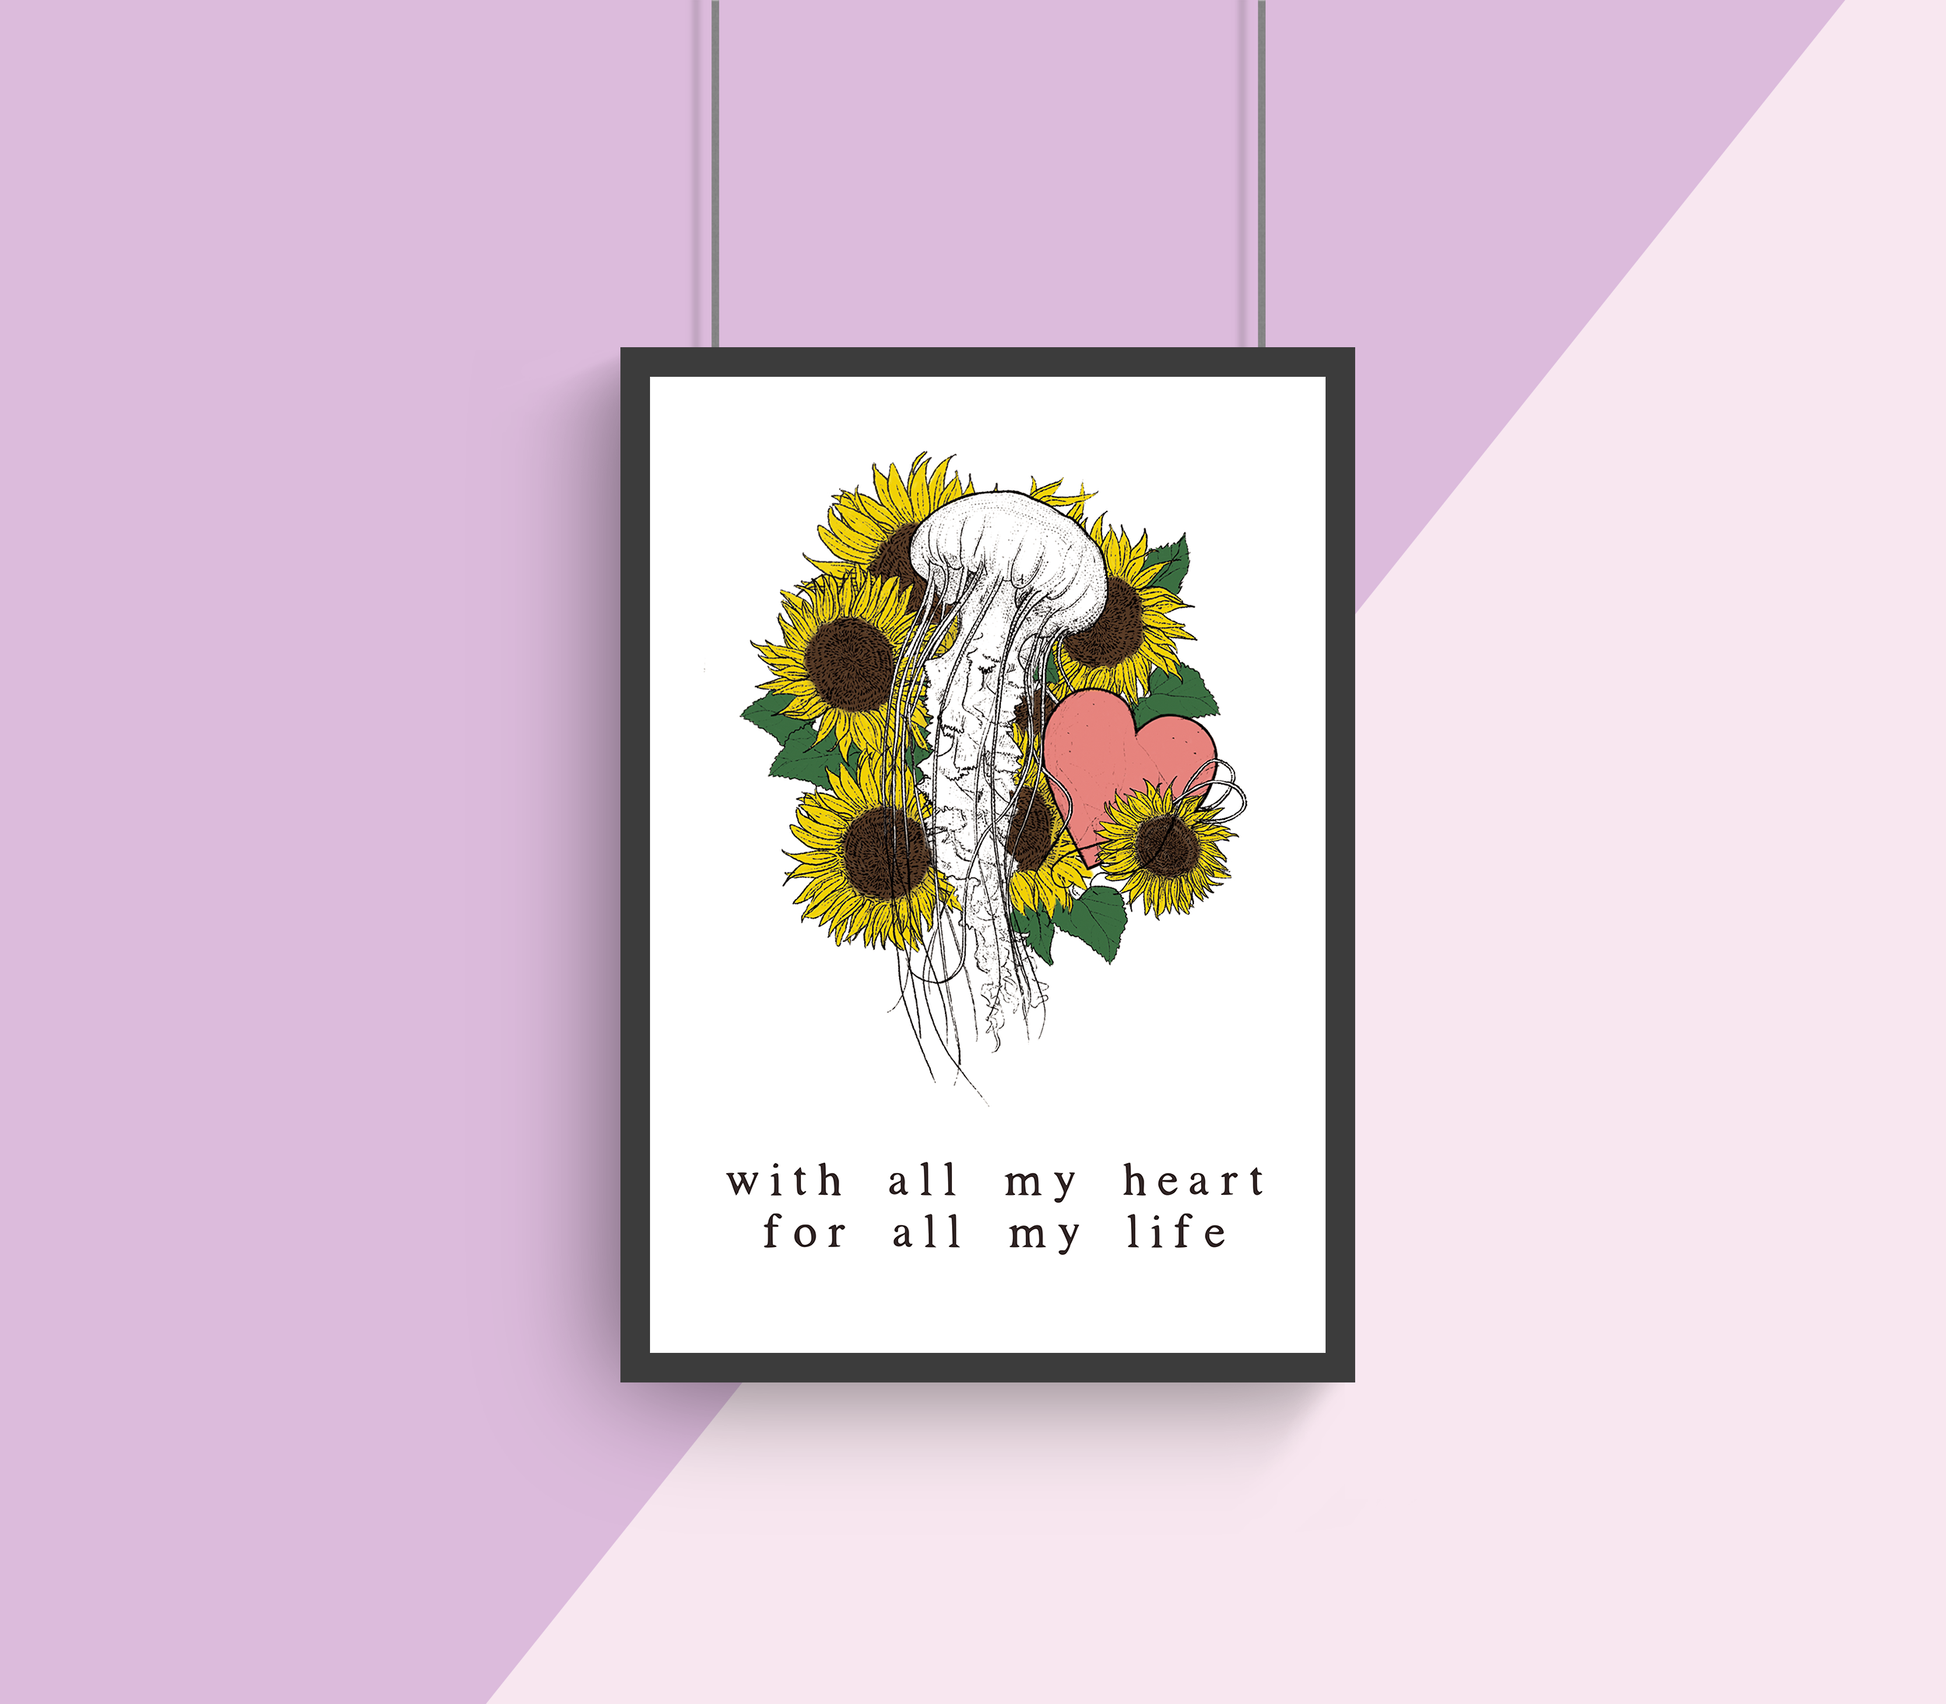 With All My Heart A4 Print Collaboration by Two Brides Presents and Courtney Peppernell